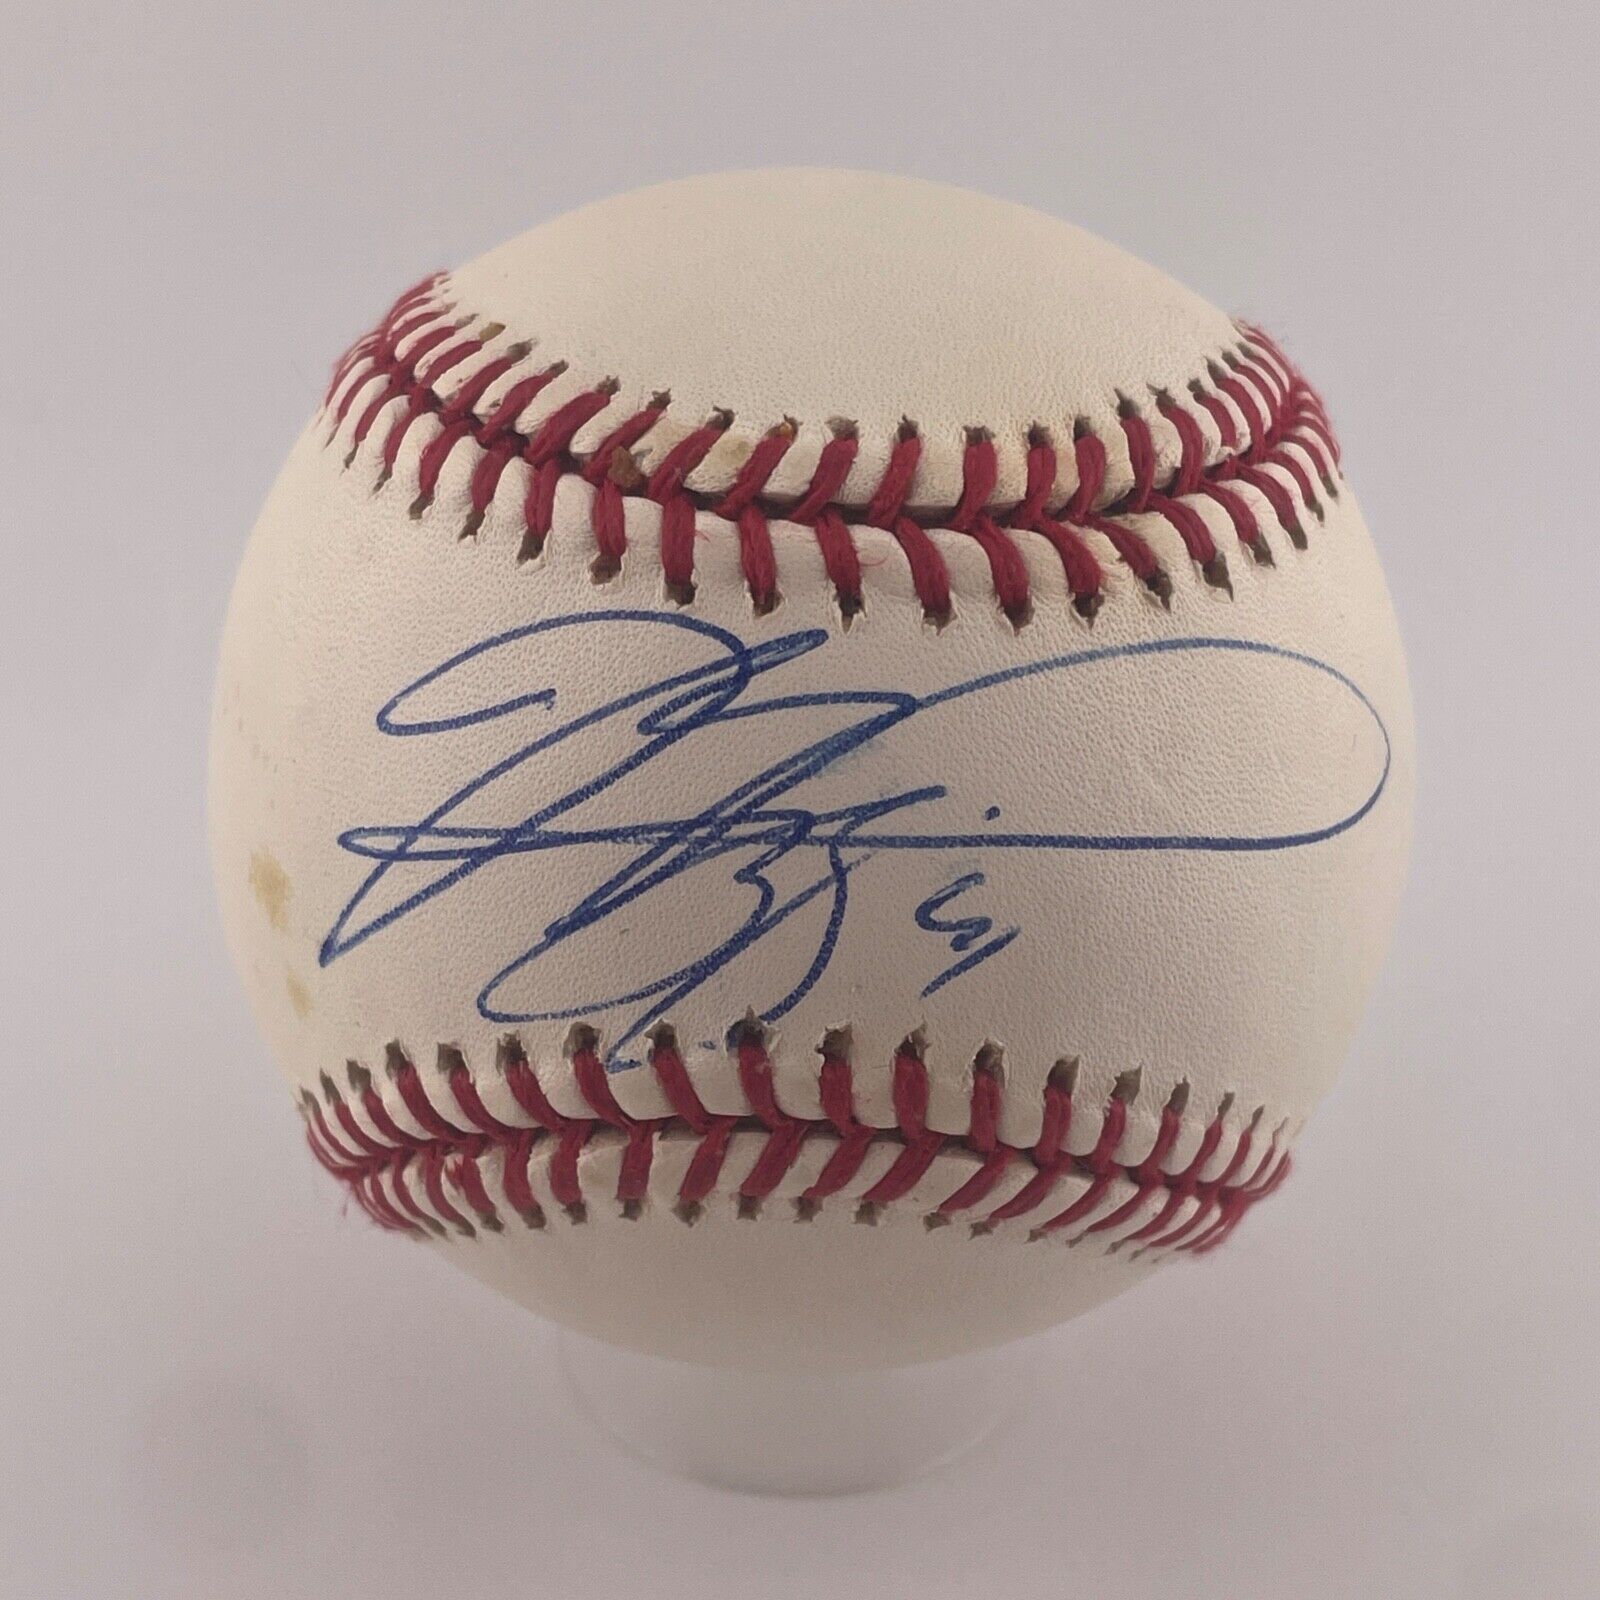 Mike Piazza Signed Baseball. New York Mets. JSA